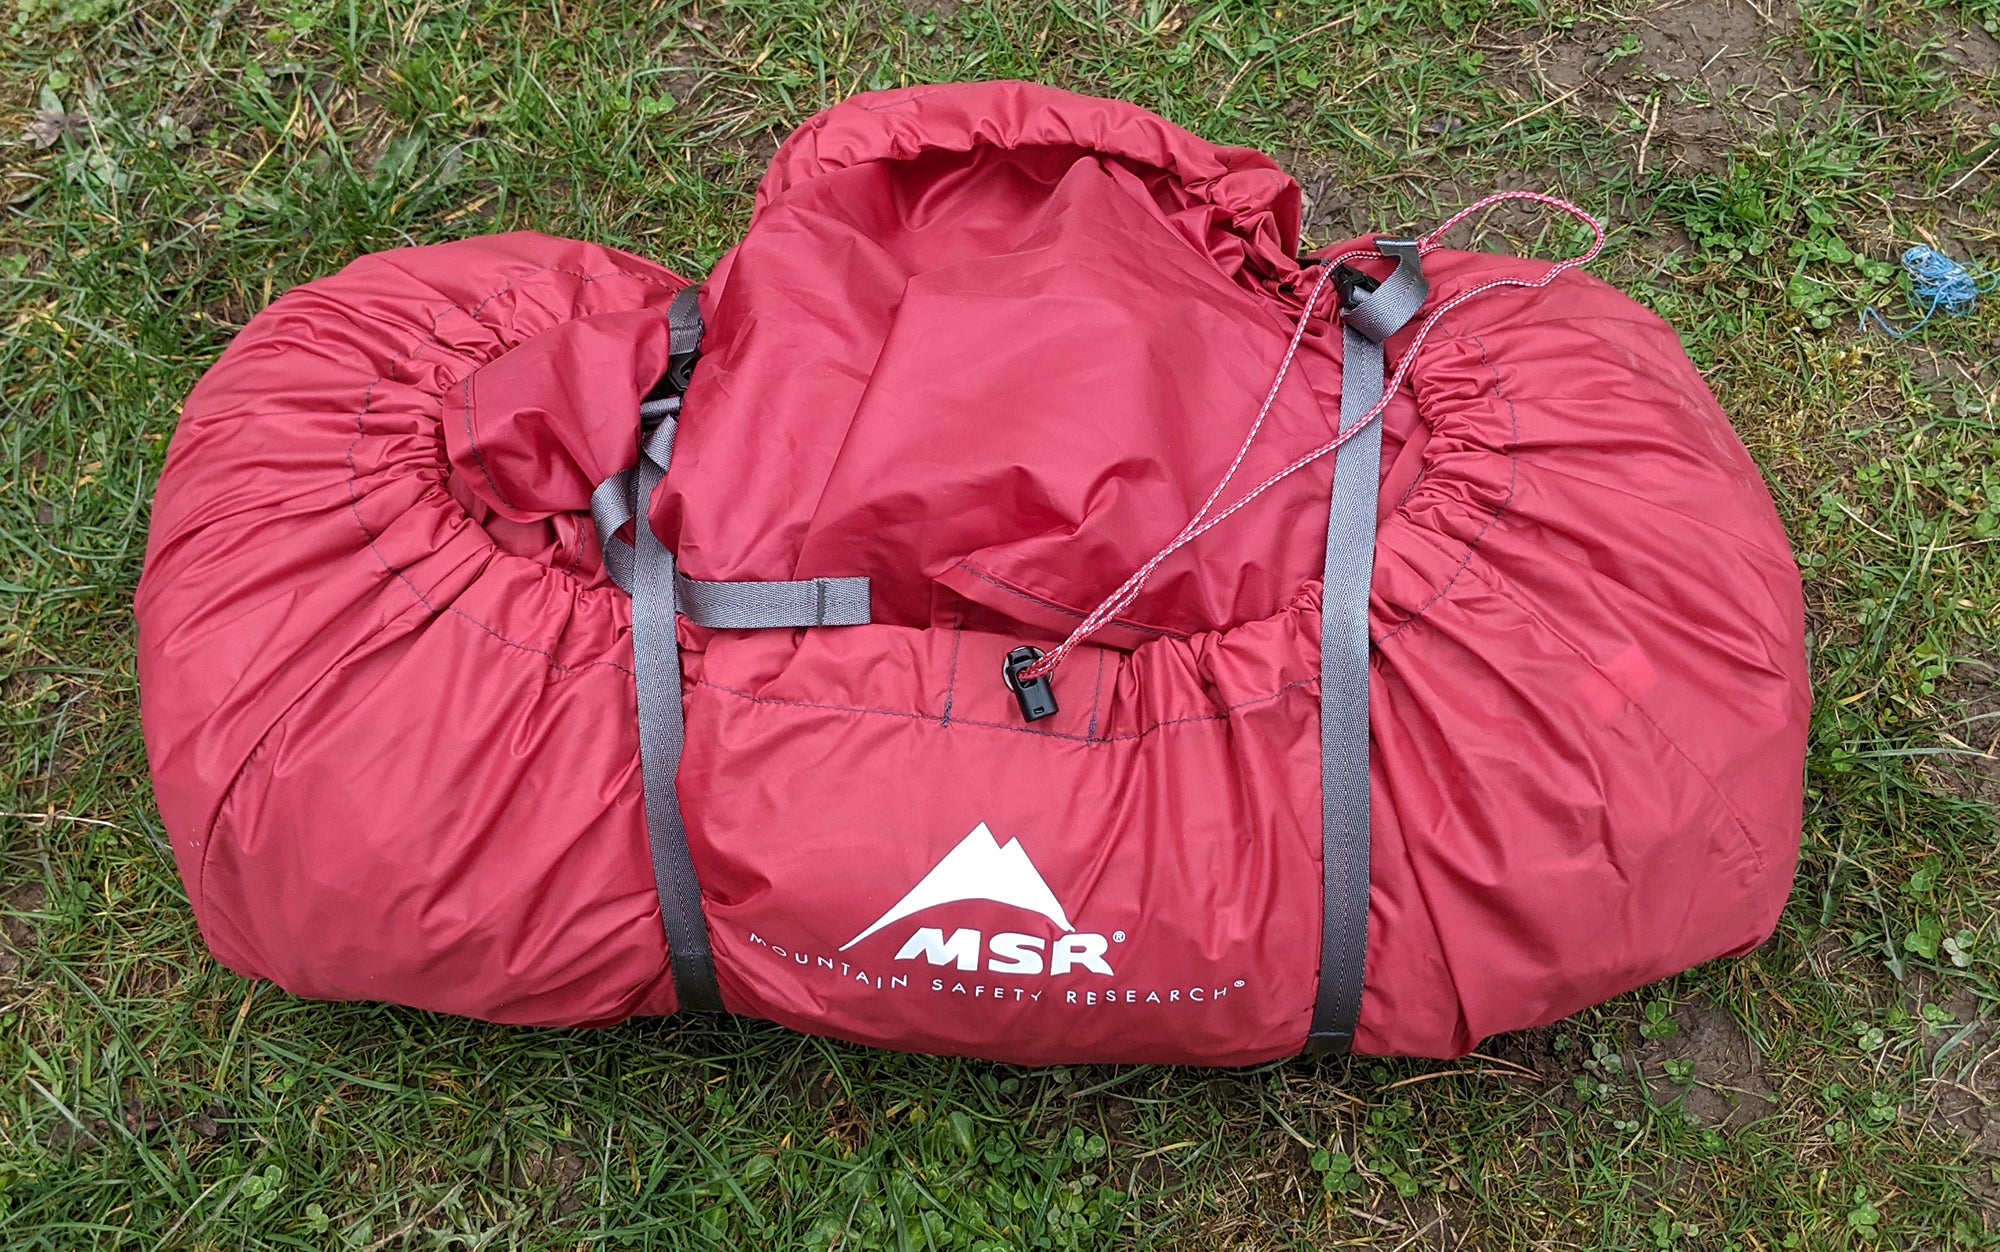 Packing away a wet tent is a lot less painful with the thoughtful design of the MSR Habiscape stuff sack.